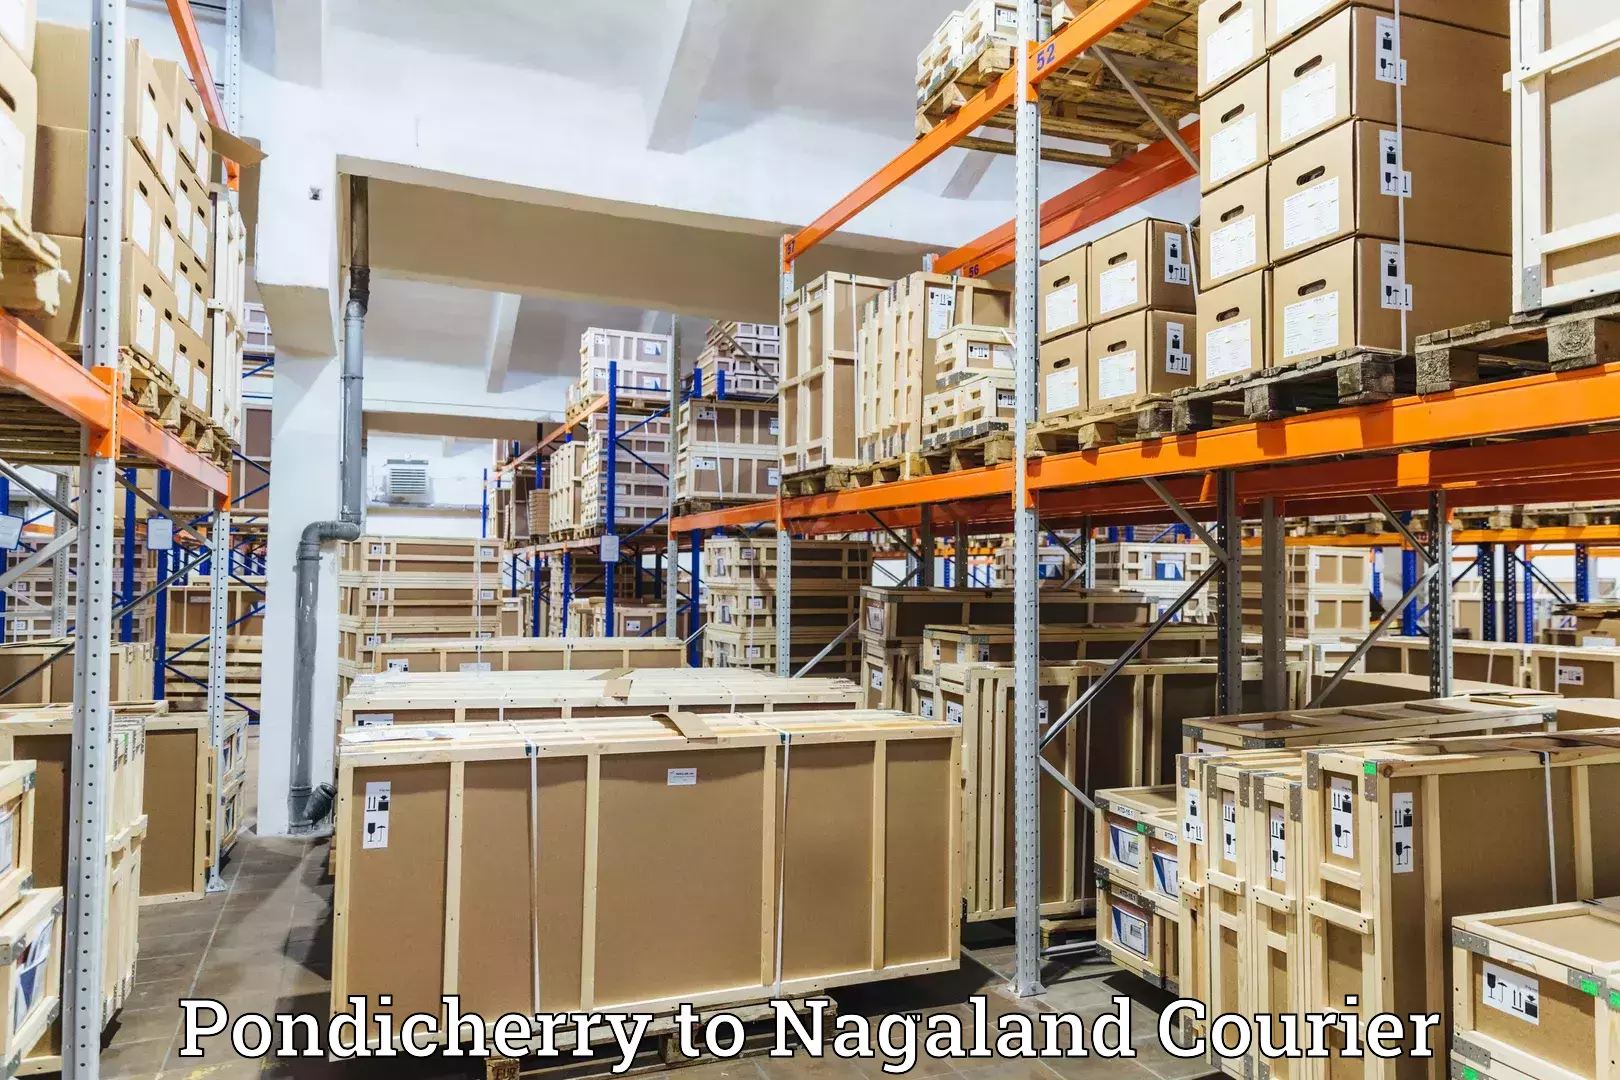 Efficient shipping operations Pondicherry to Nagaland